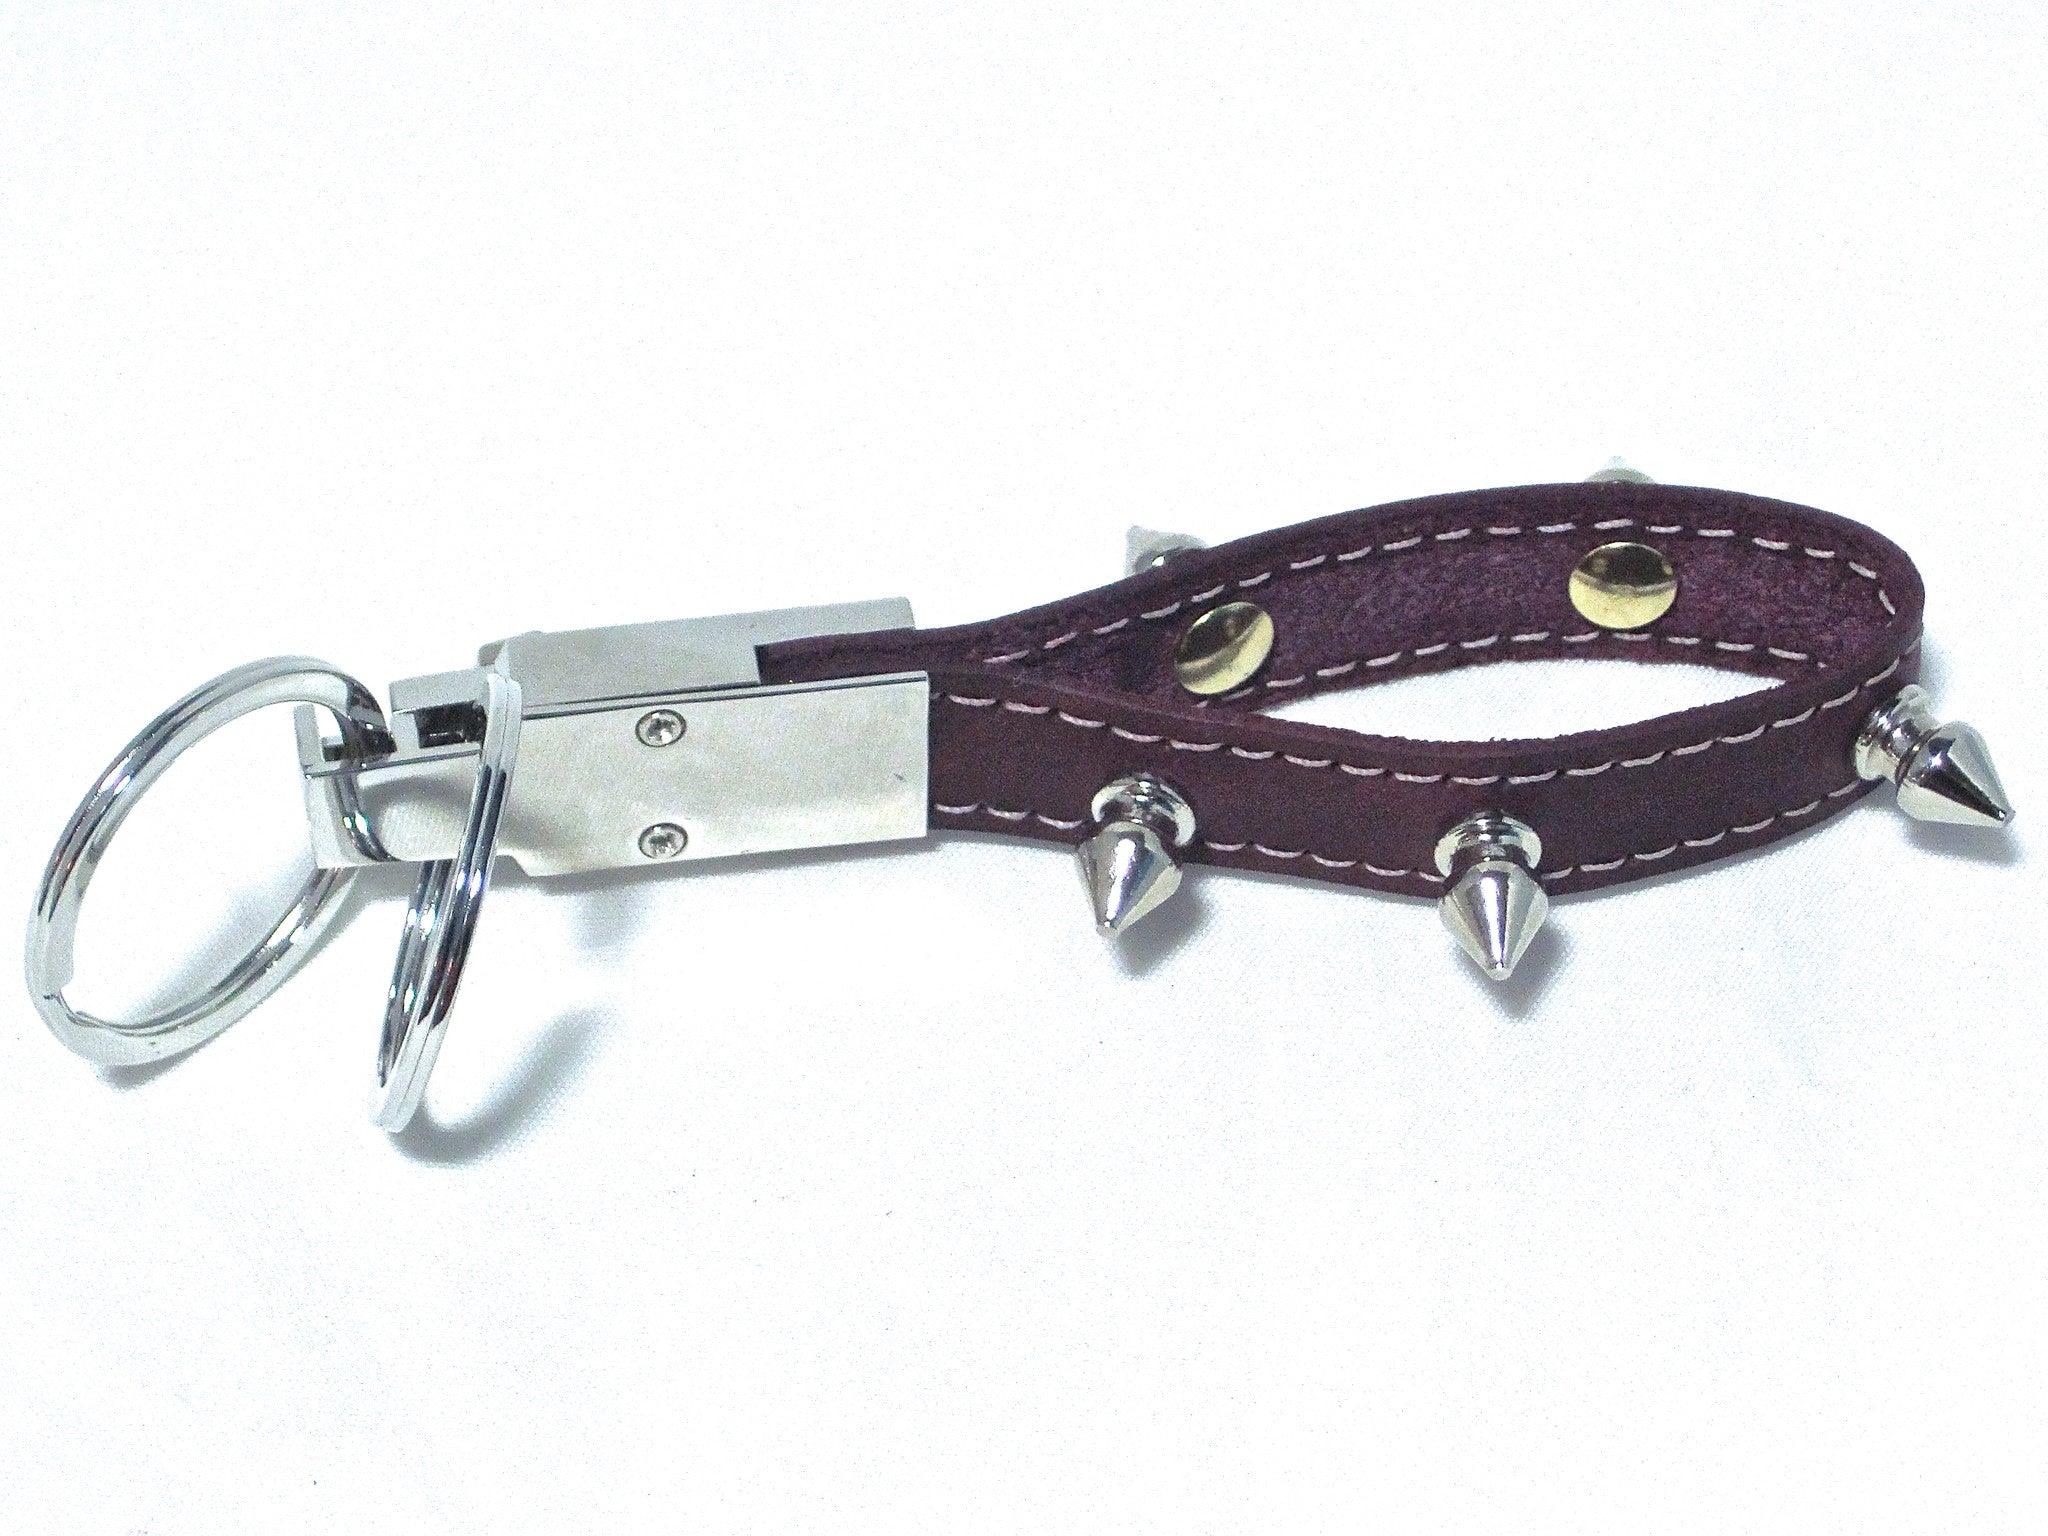 leather and spike rivets key chain by nyet jewelry.